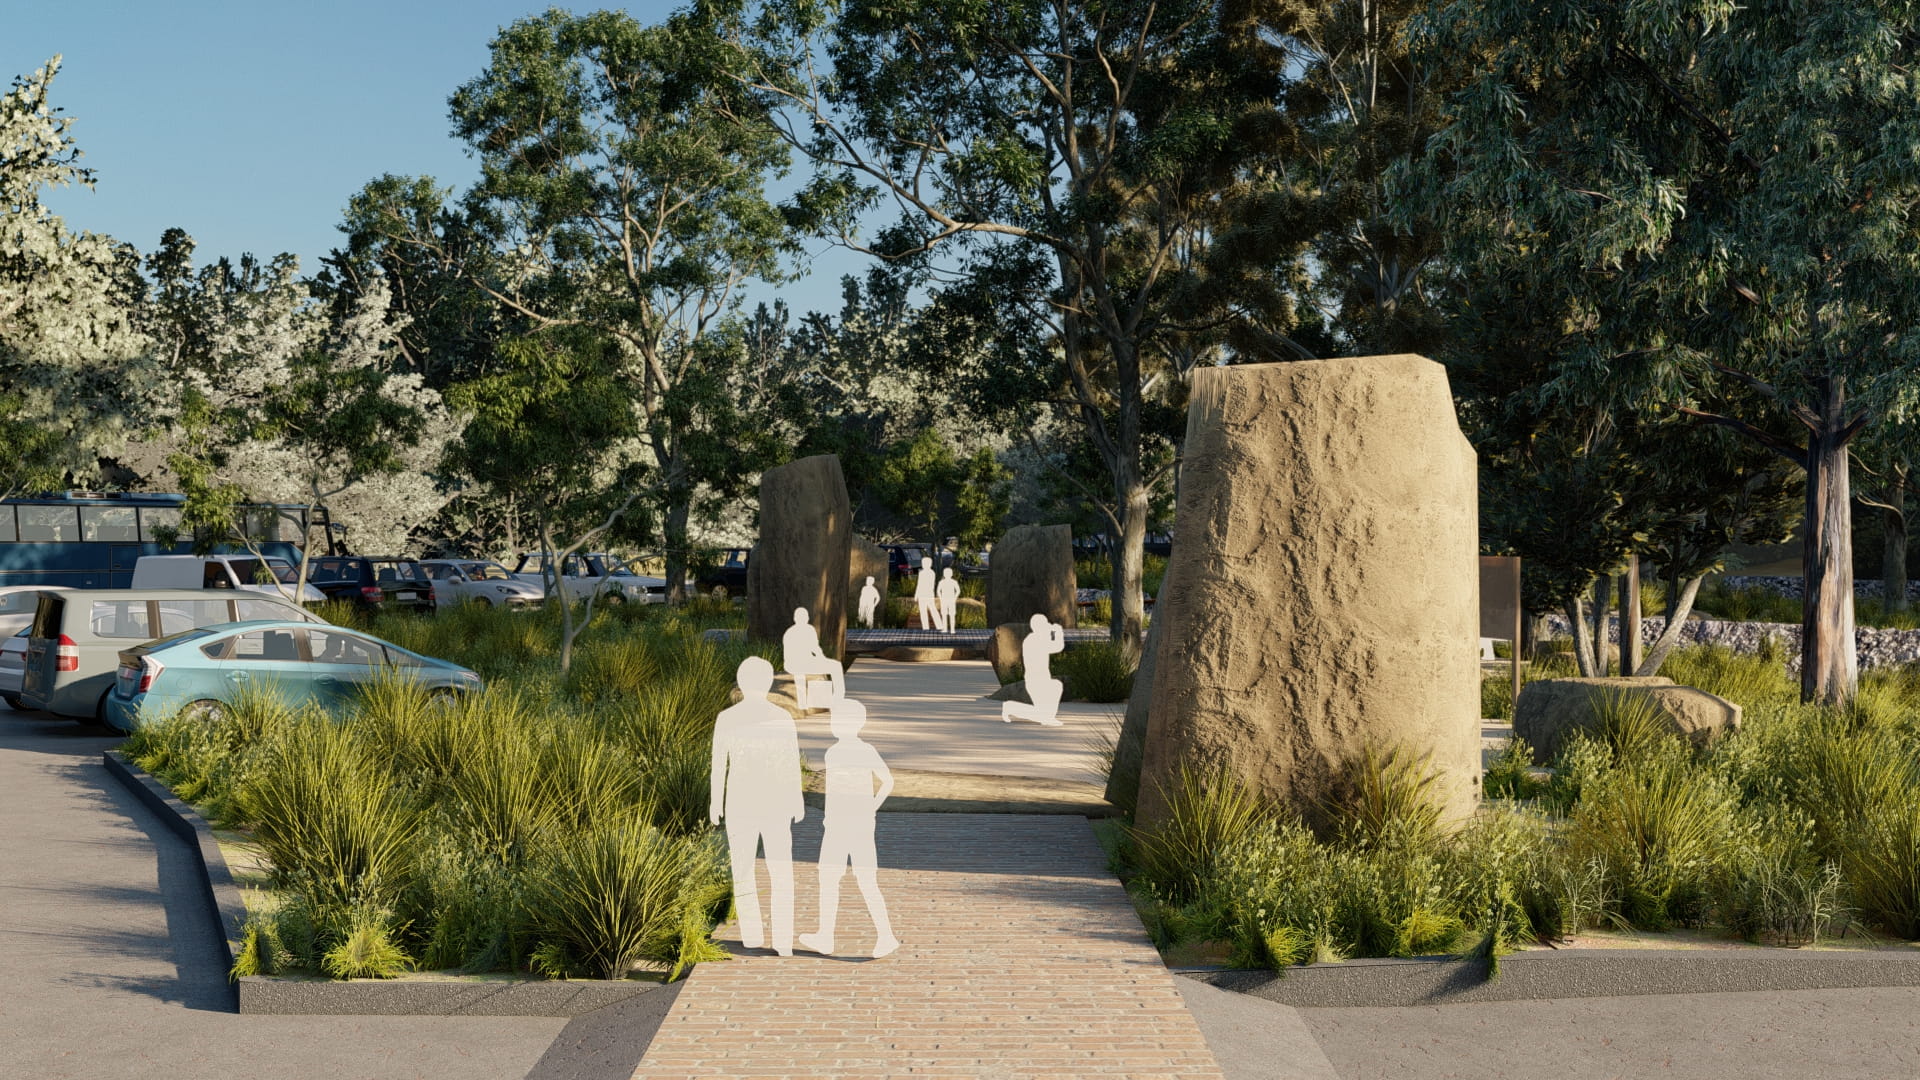 Concept illustration of people walking along path with landscaped grasses and large rock surrounding